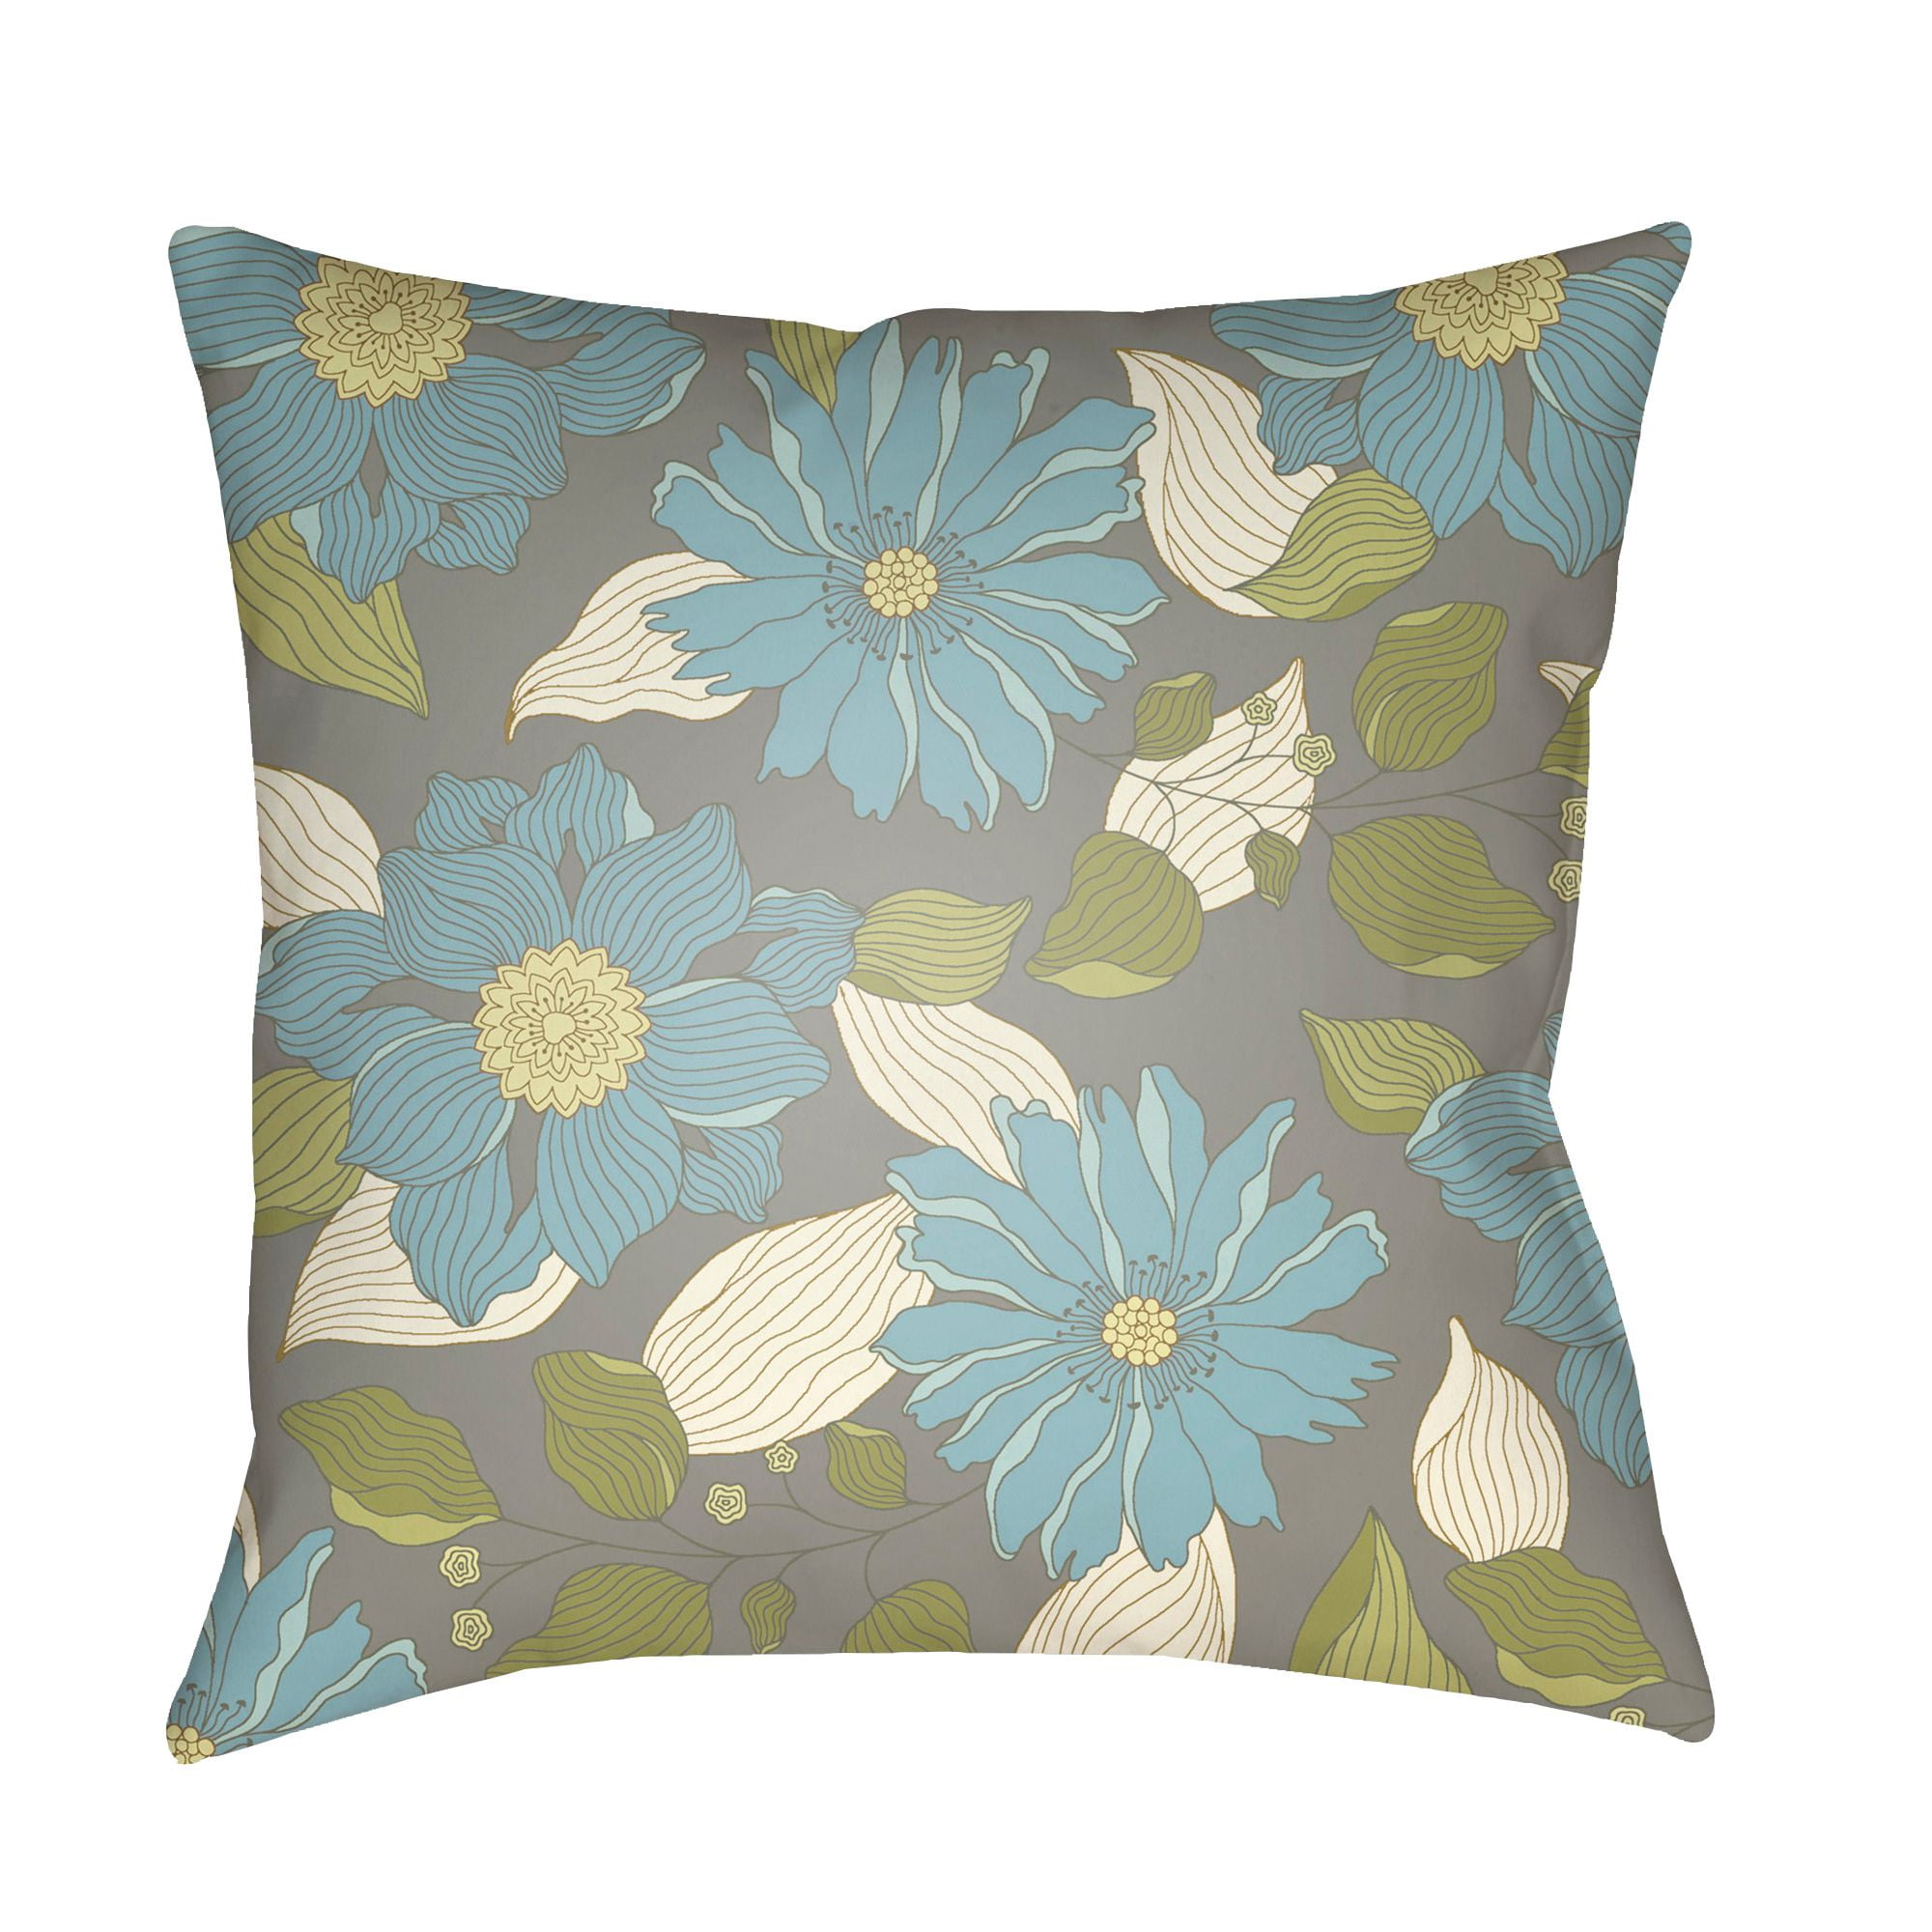 22" Olive Green and Blue Floral Square Throw Pillow Cover